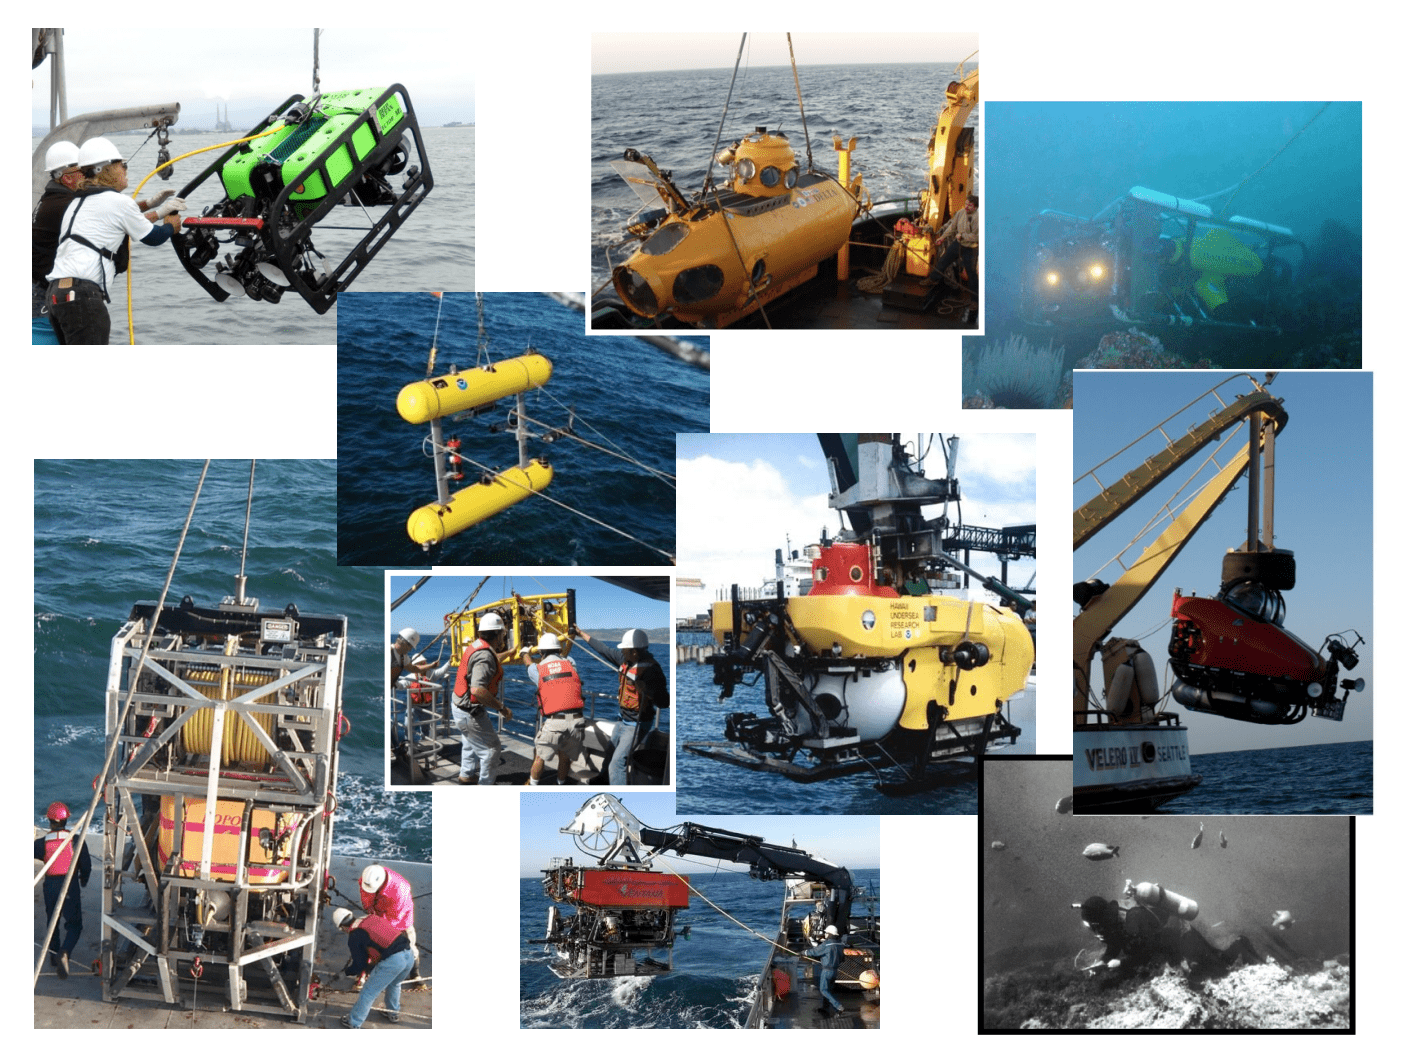 June 2015 - A COMPARATIVE ASSESSMENT OF UNDERWATER VISUAL SURVEY TOOLS: 87